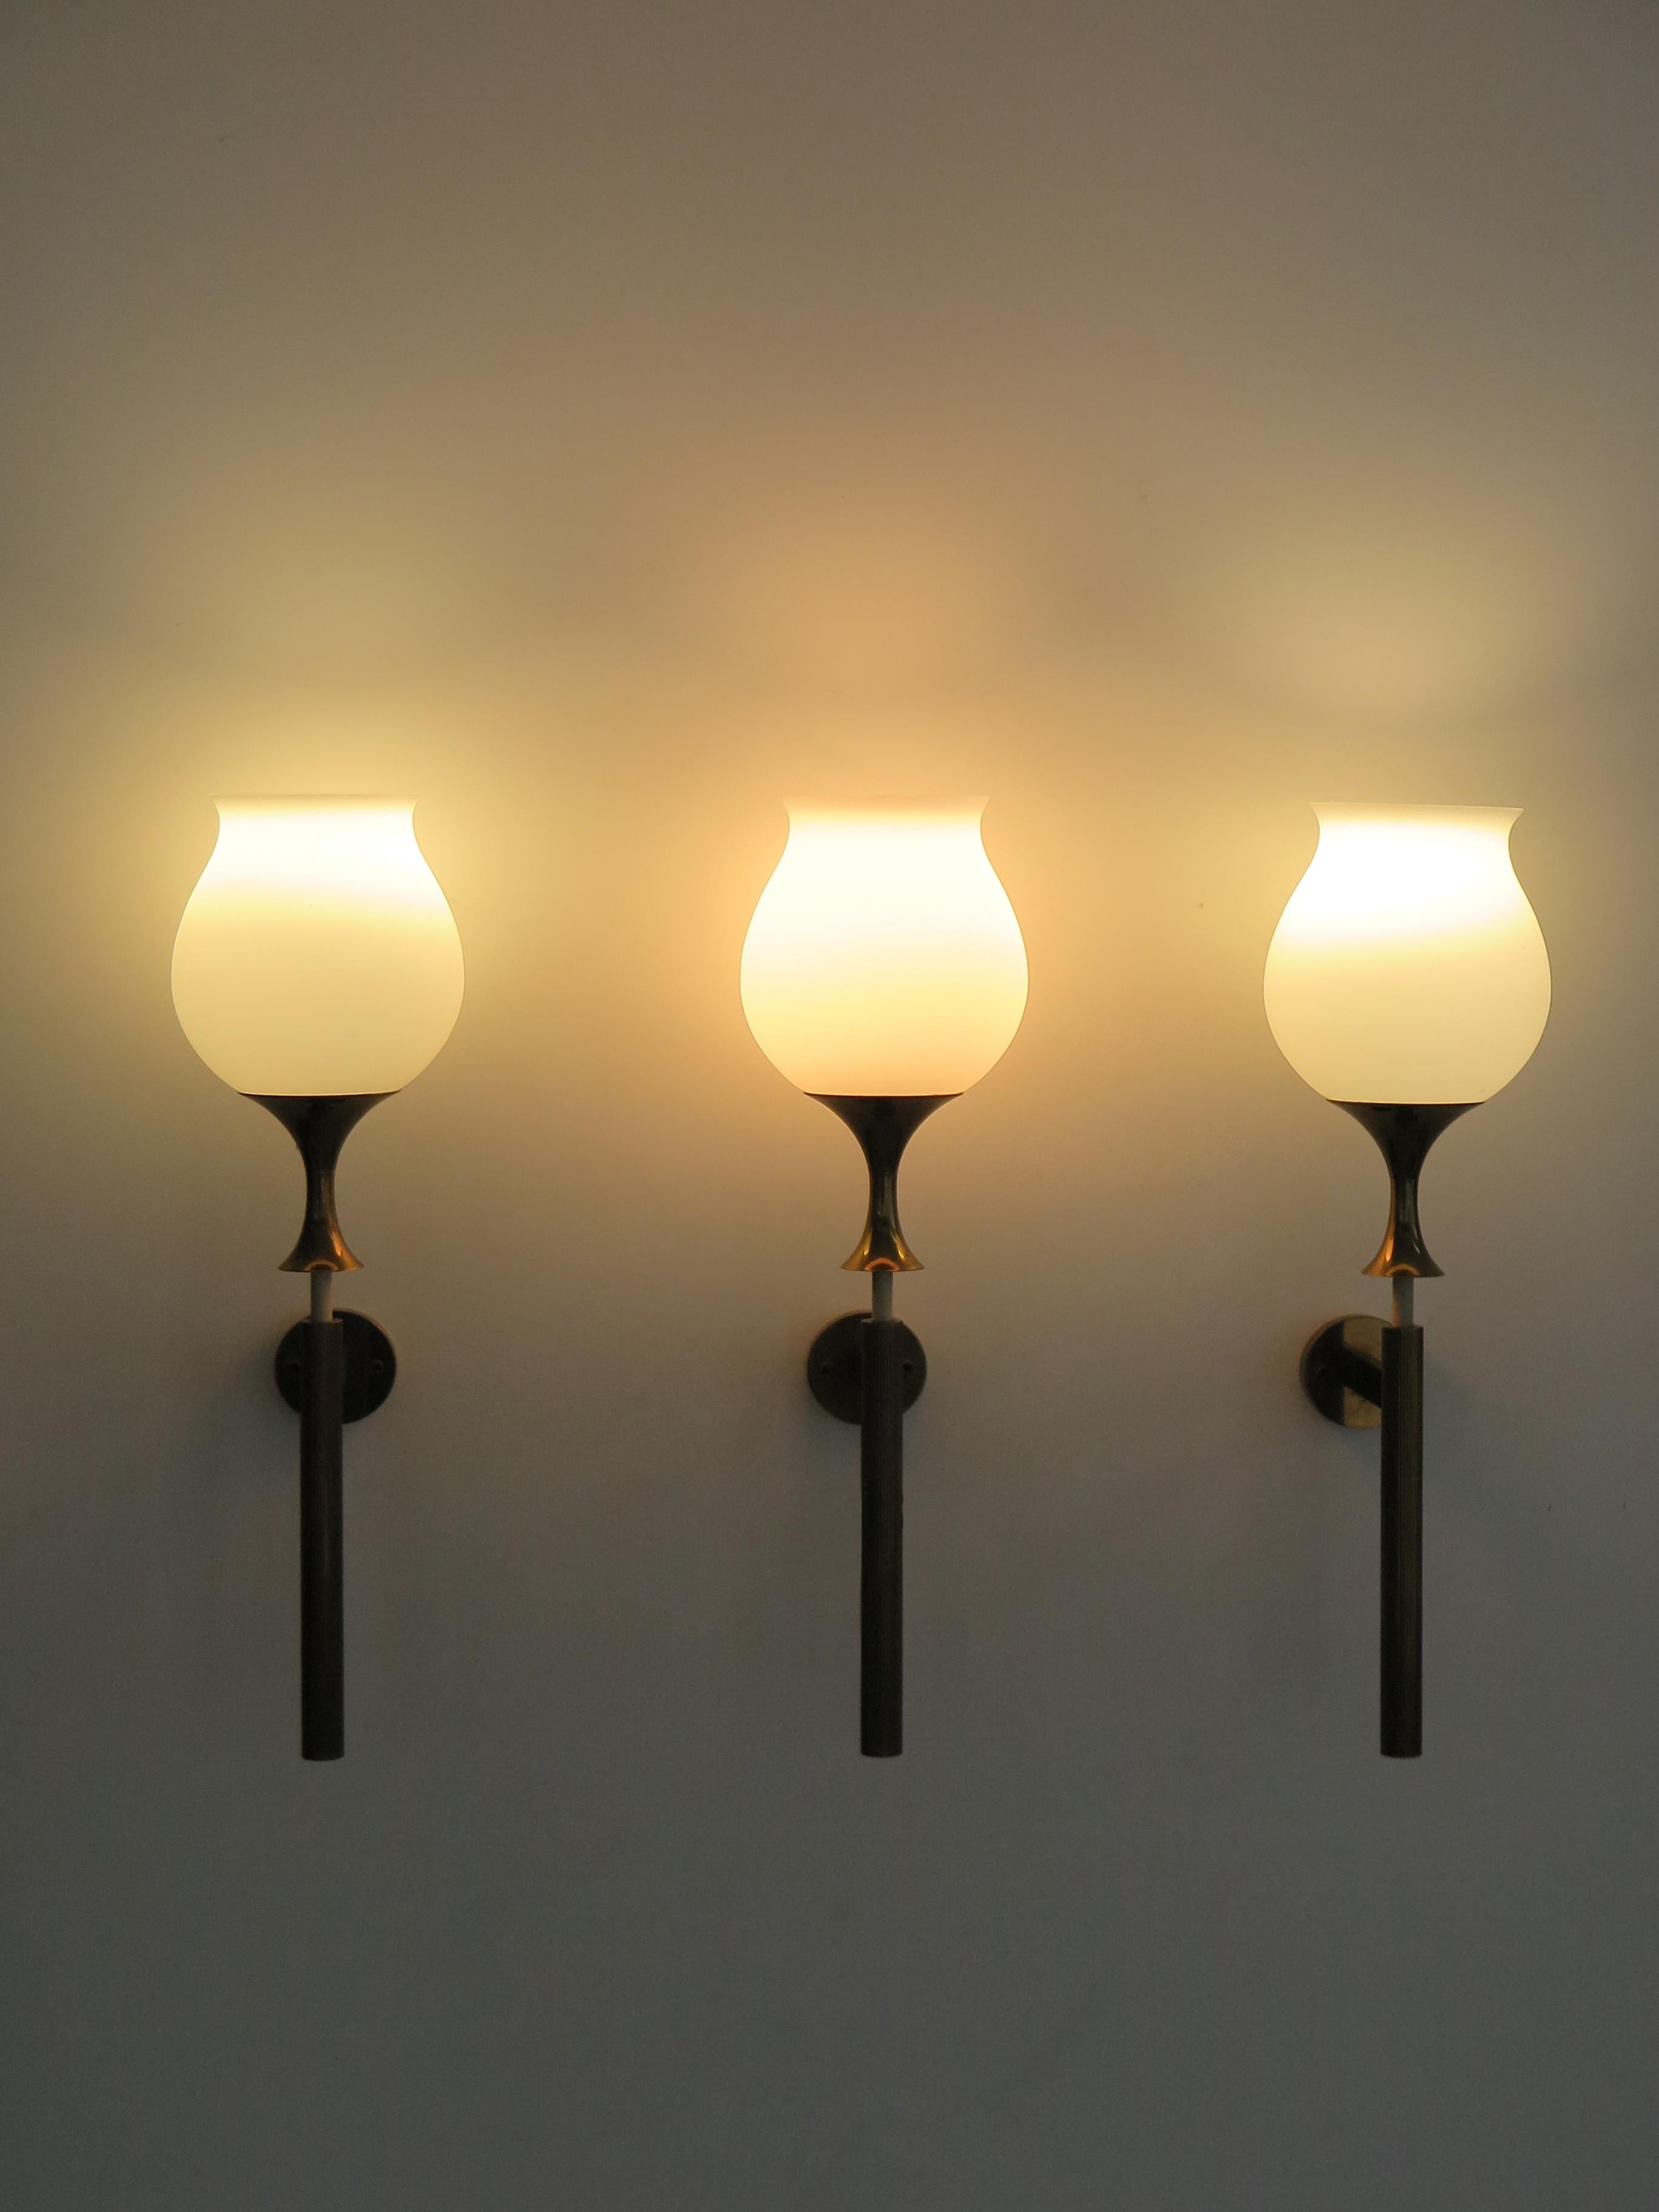 Italian midcentury modern design sconces wall lamps designed by Angelo Lelii and produced by Arredoluce Monza with white opaline glass diffusers and brass frame, production mark engraved on back, Italy 1950s 

Bibliography:
Pansera A., Padoan A.,